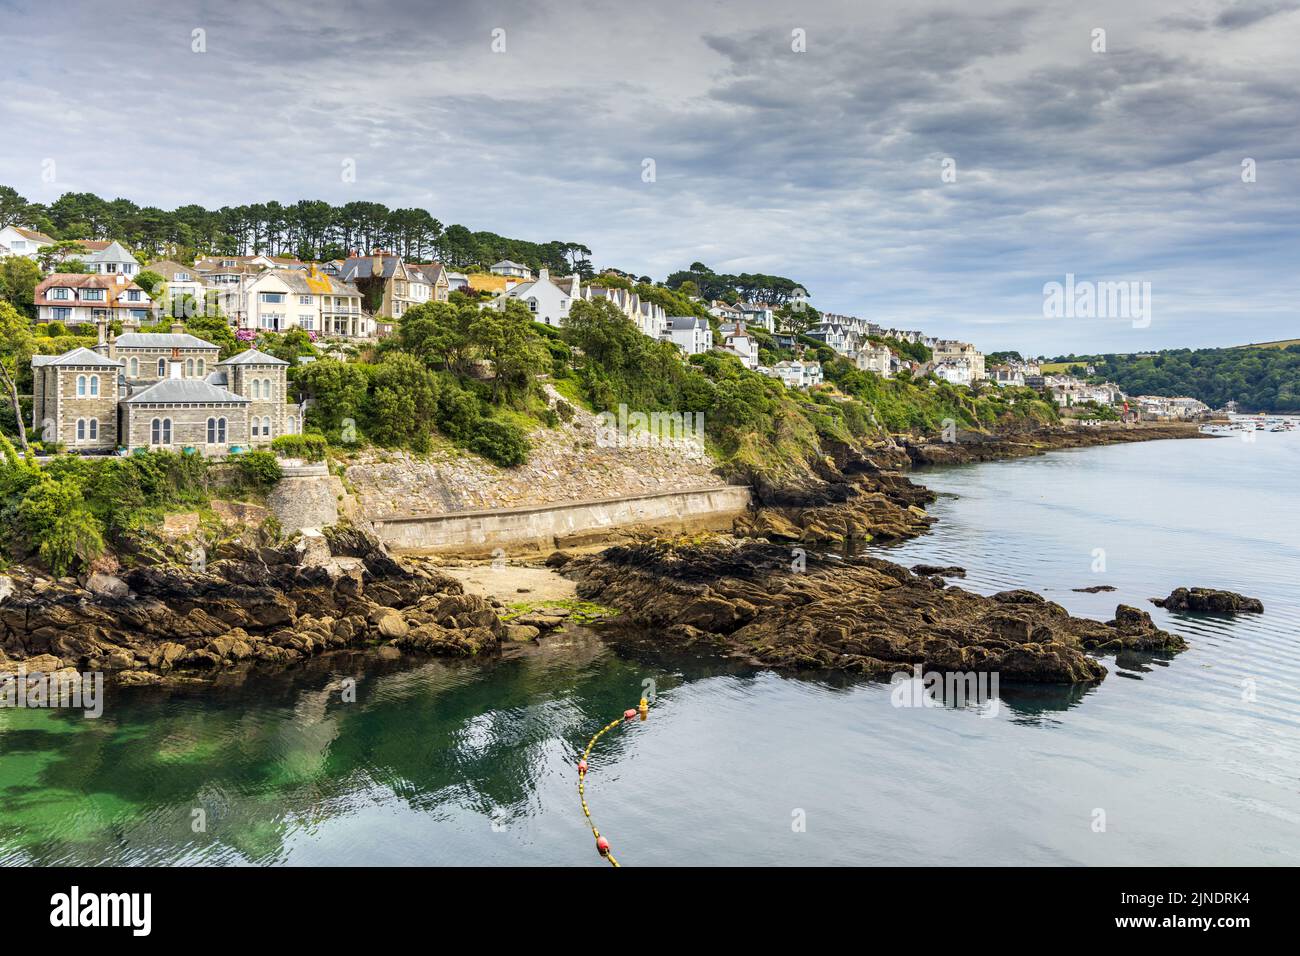 View up the River Fowey towards the town of Fowey in Cornwall. The large house on the left is Point Neptune House, recently owned by Dawn French. Stock Photo